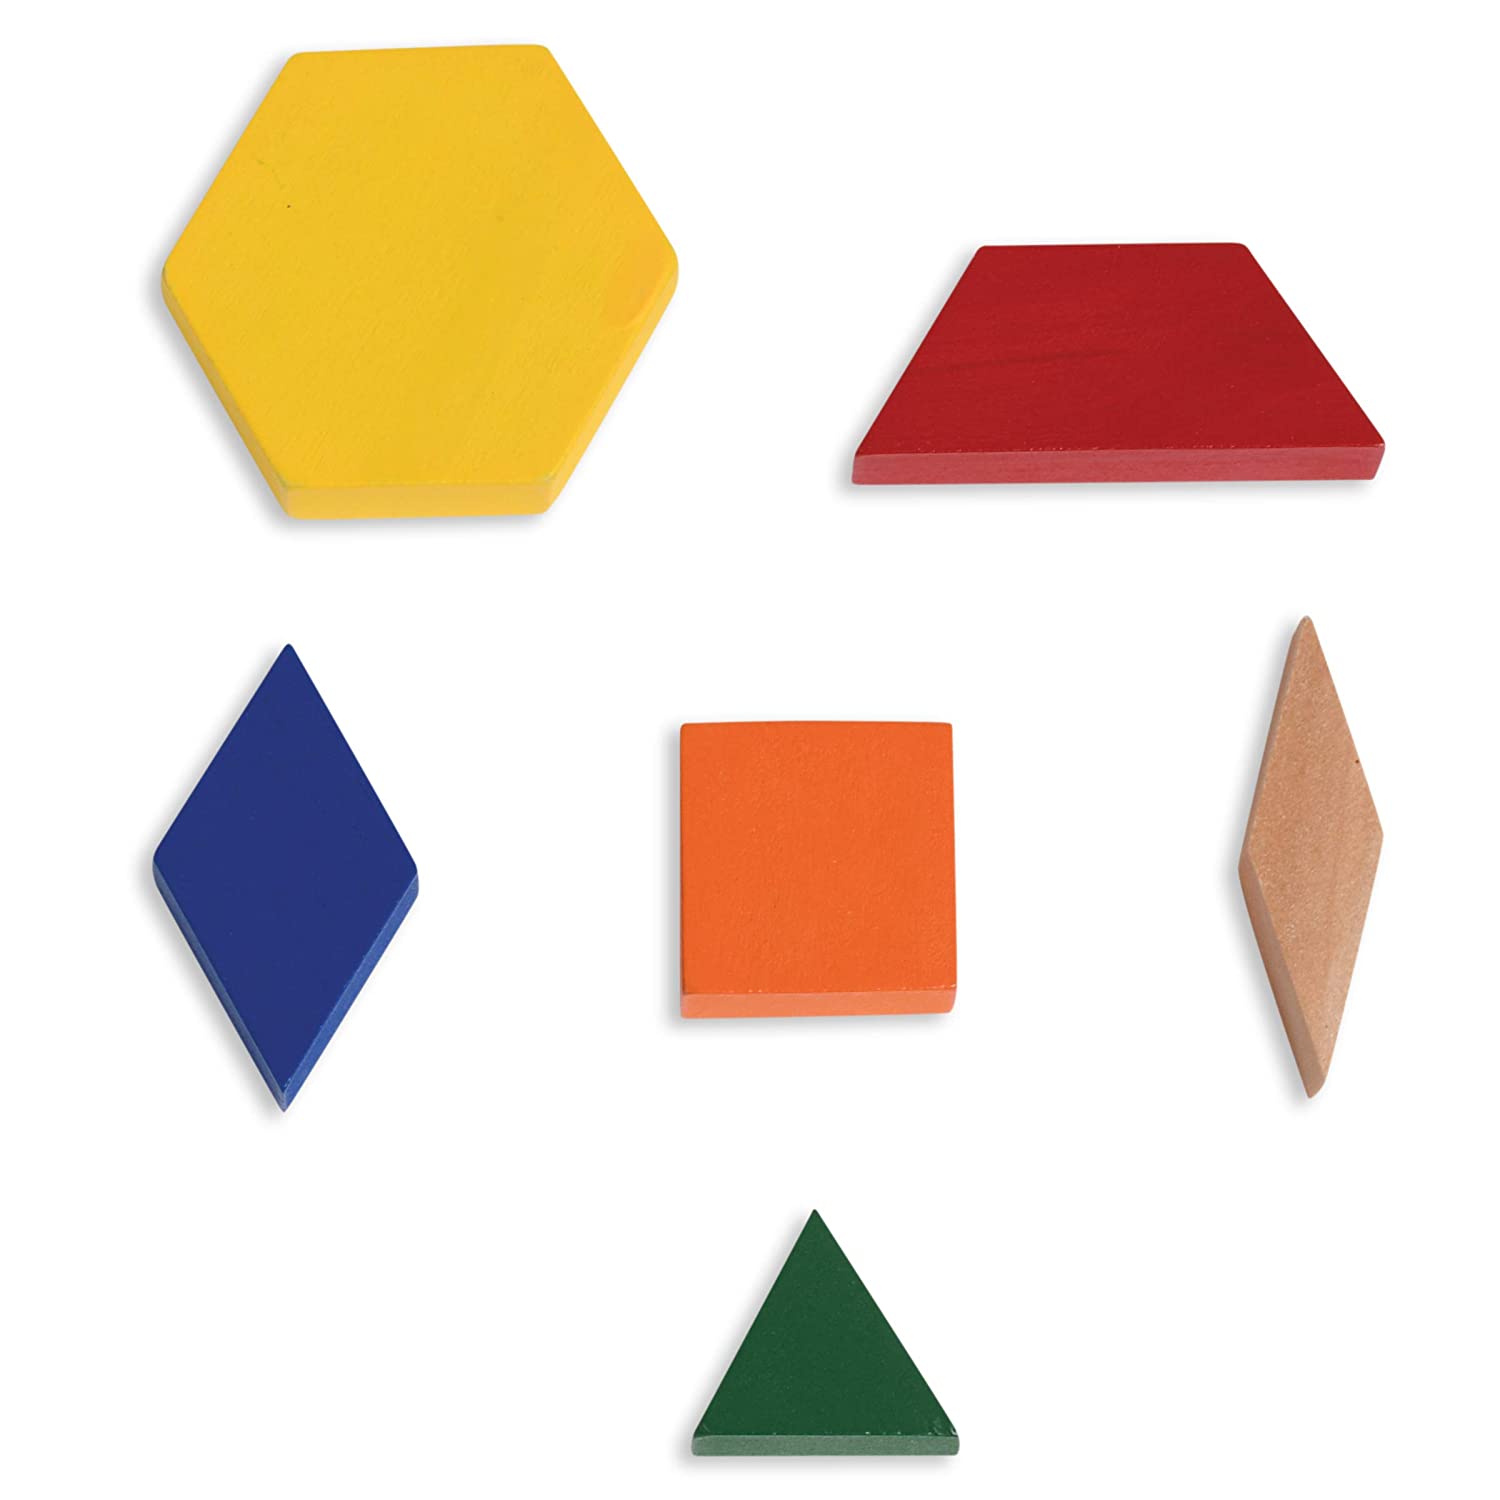 LEARNING ADVANTAGE Wood Pattern Blocks - Set of 250 - 6 Shapes and Colors - 1cm Thick - Early Geometry for Kids - Teach Shape Attributes, Patterning and Fractions